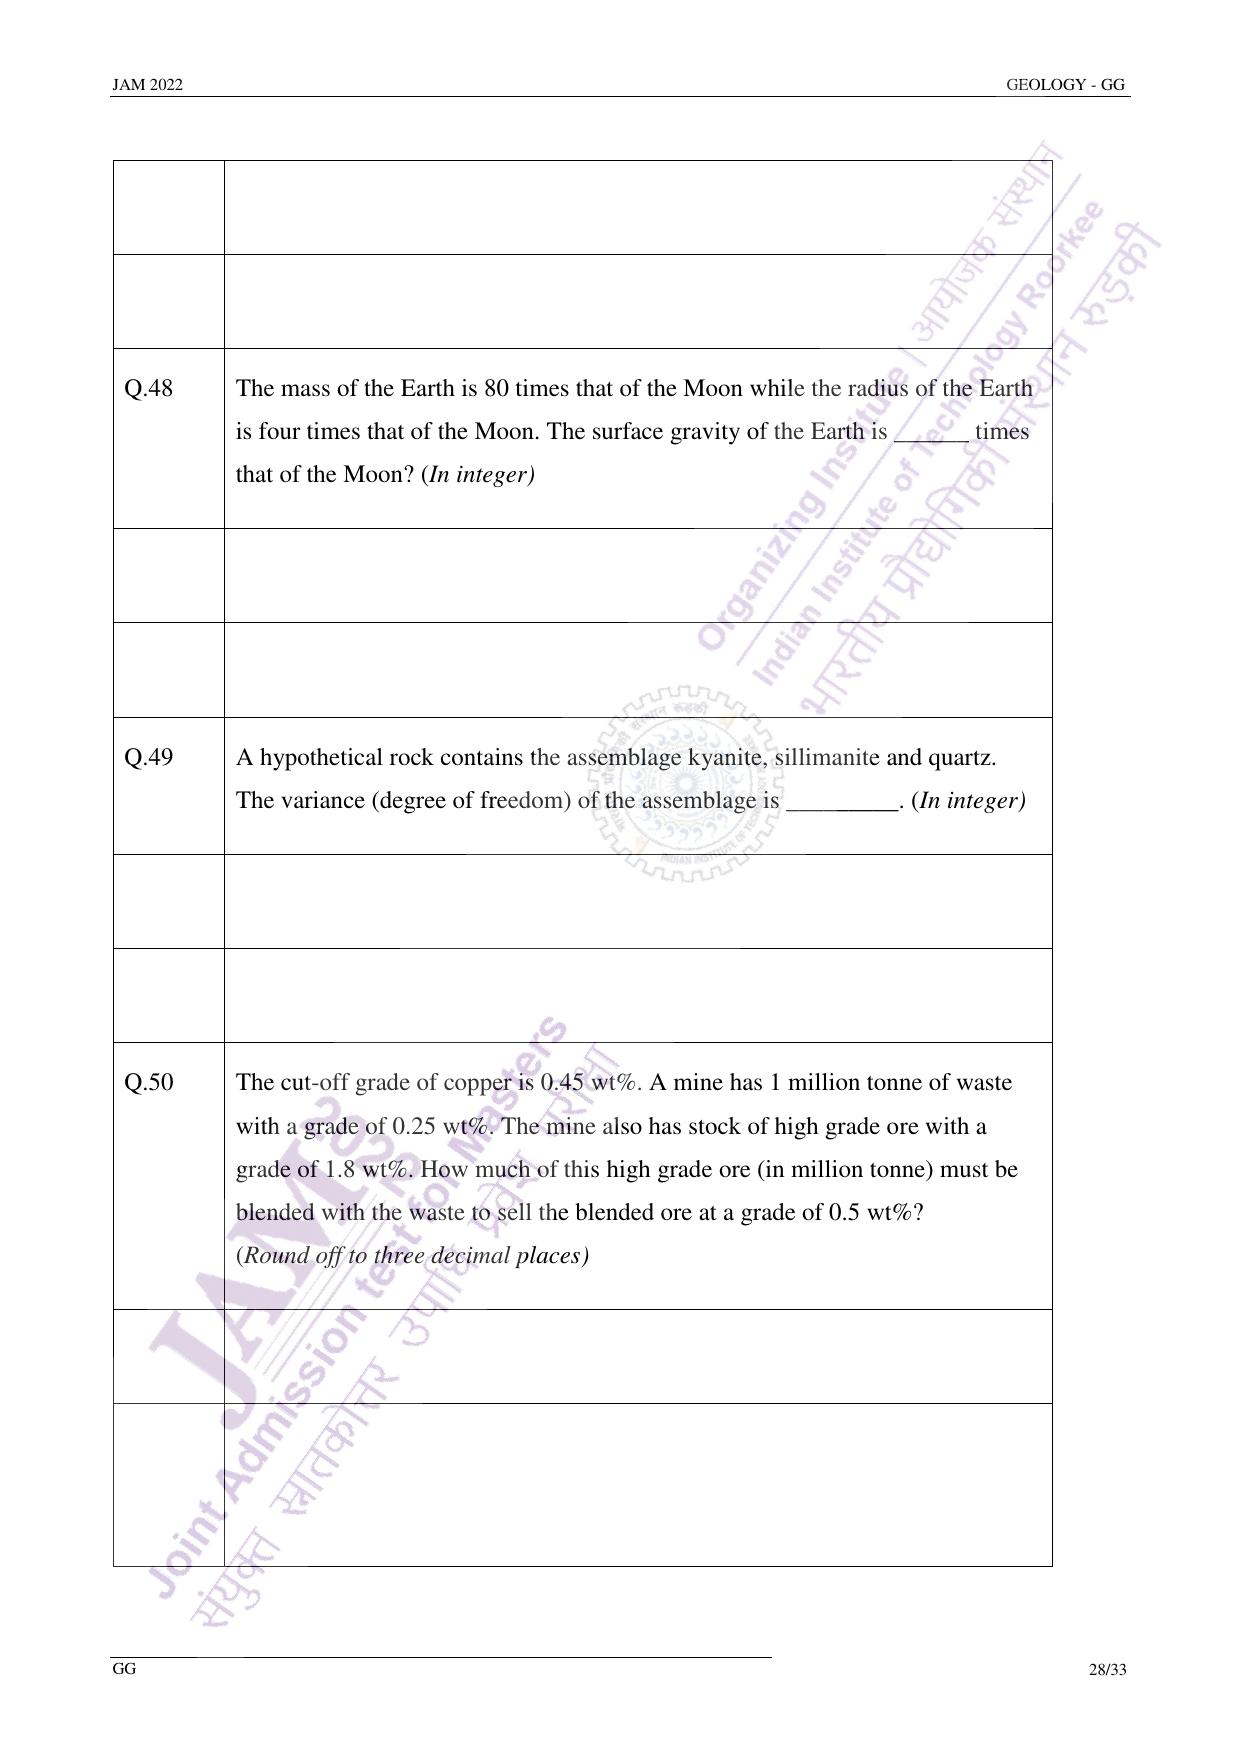 JAM 2022: GG Question Paper - Page 27